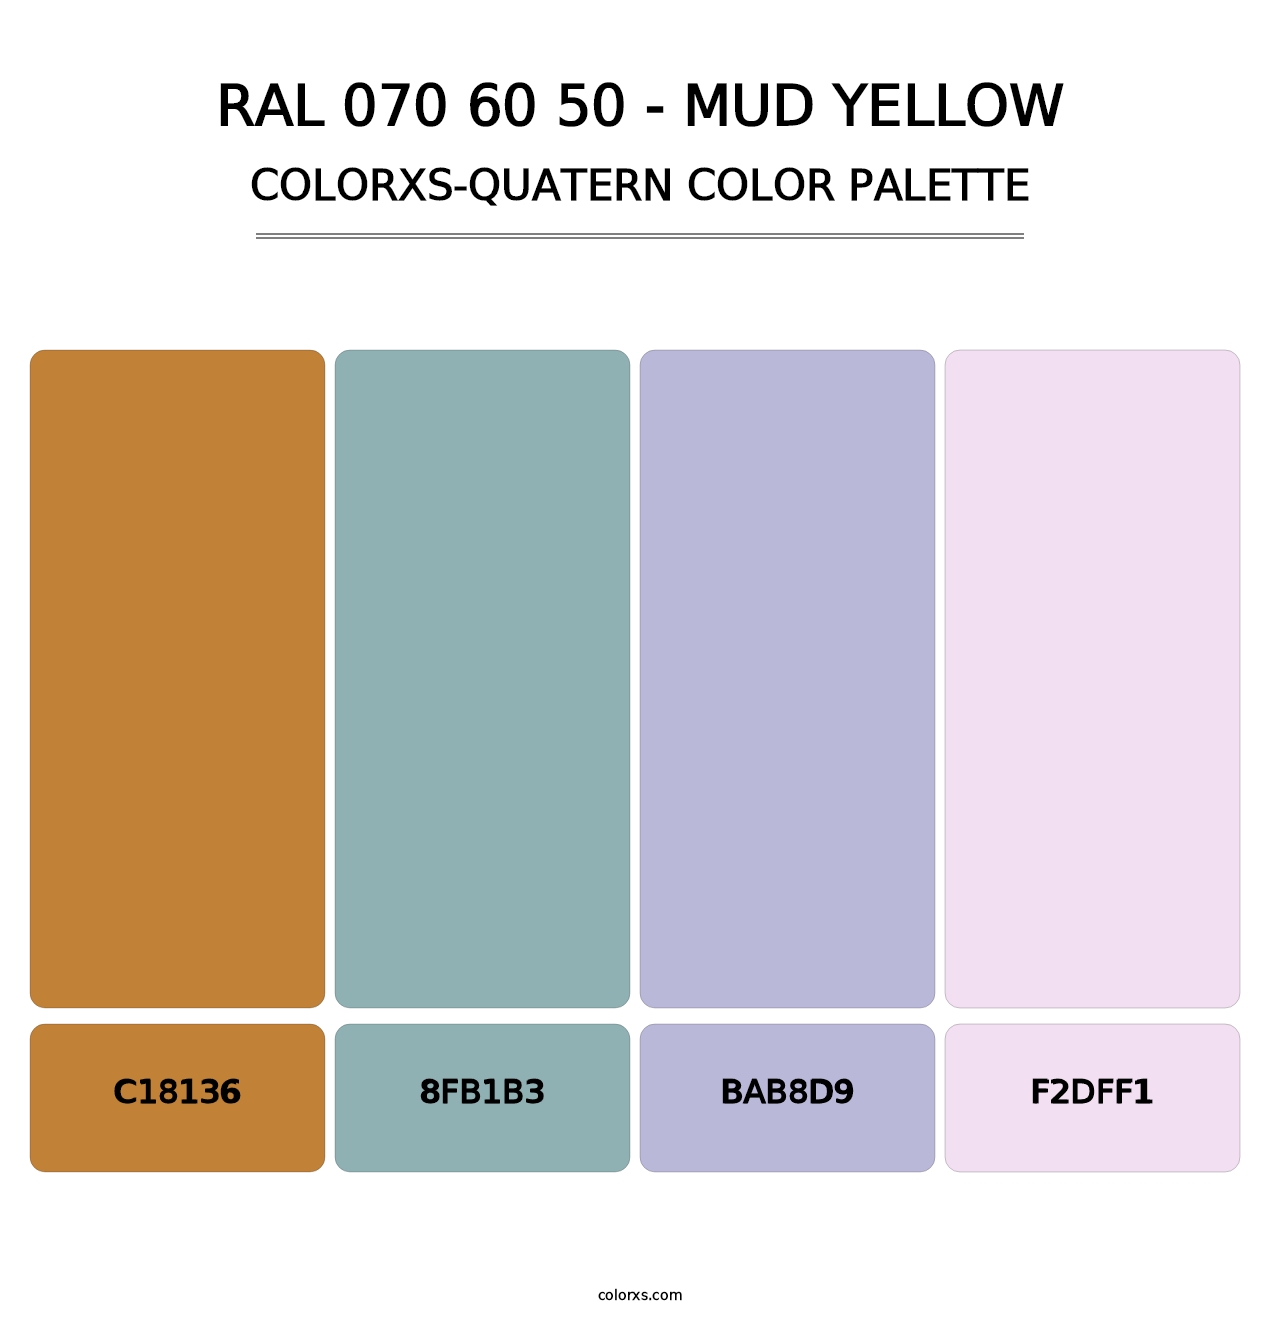 RAL 070 60 50 - Mud Yellow - Colorxs Quatern Palette